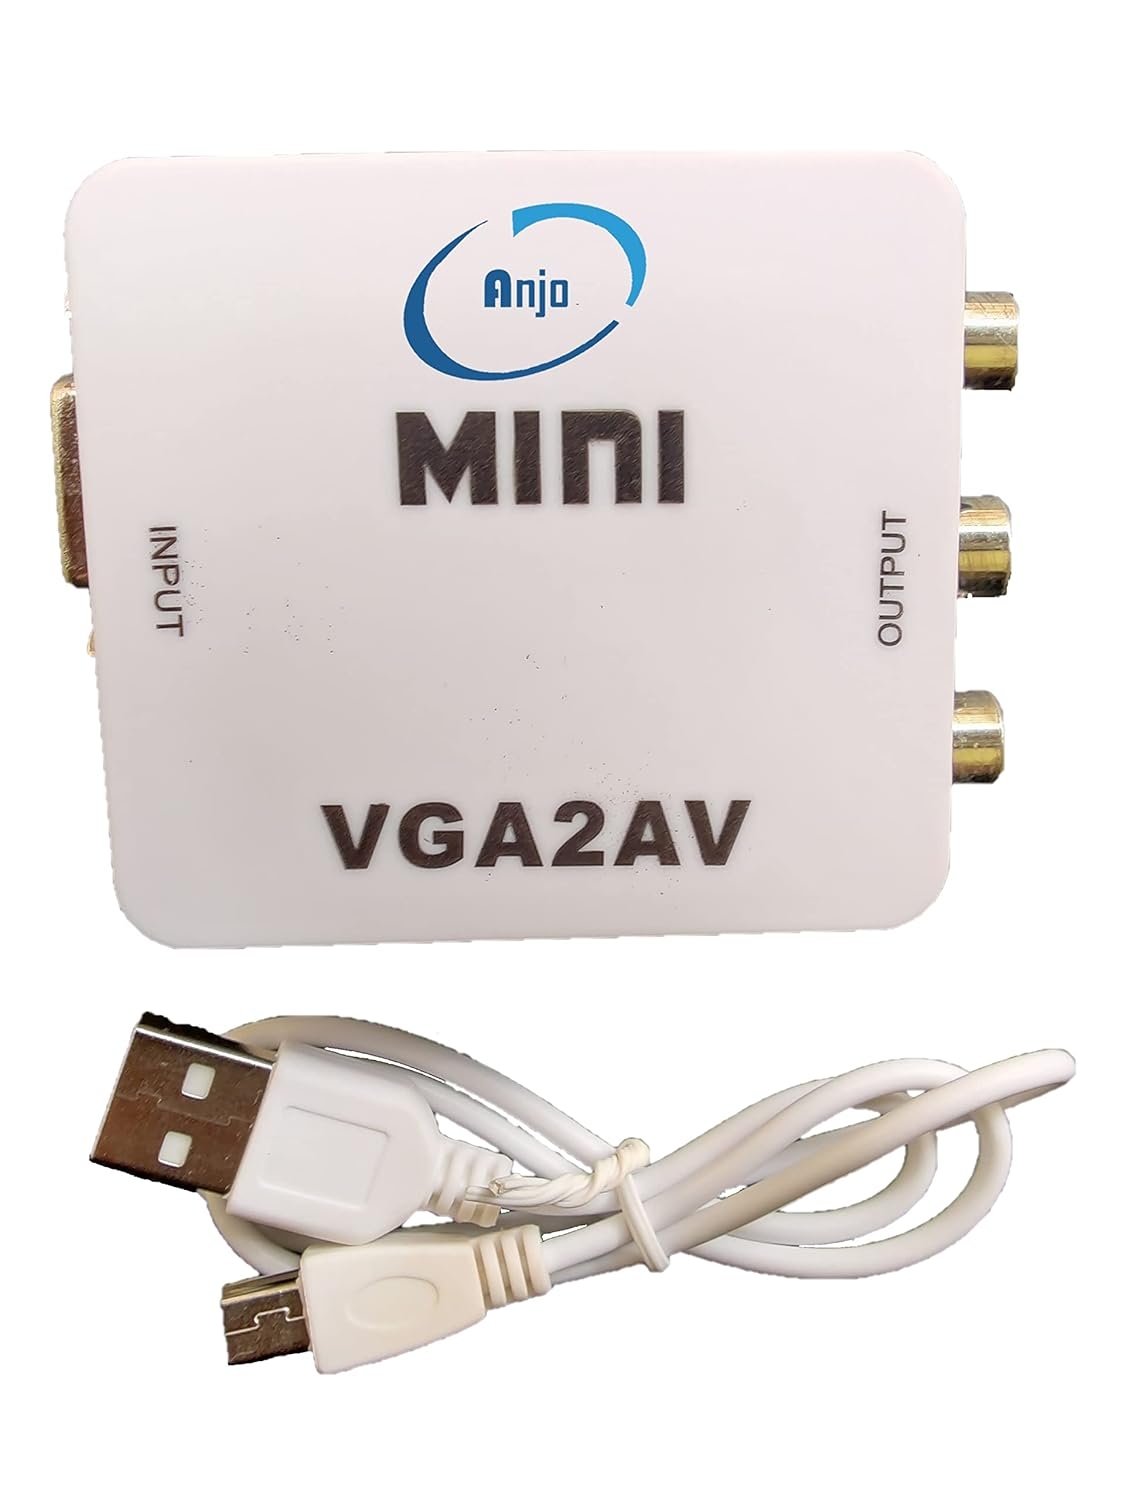 VGA to AV/RCA/CVBS Audio Video Converter Adapter Box with USB Power 3.5mm Audio/Aux Cable for TV, PC, Laptop